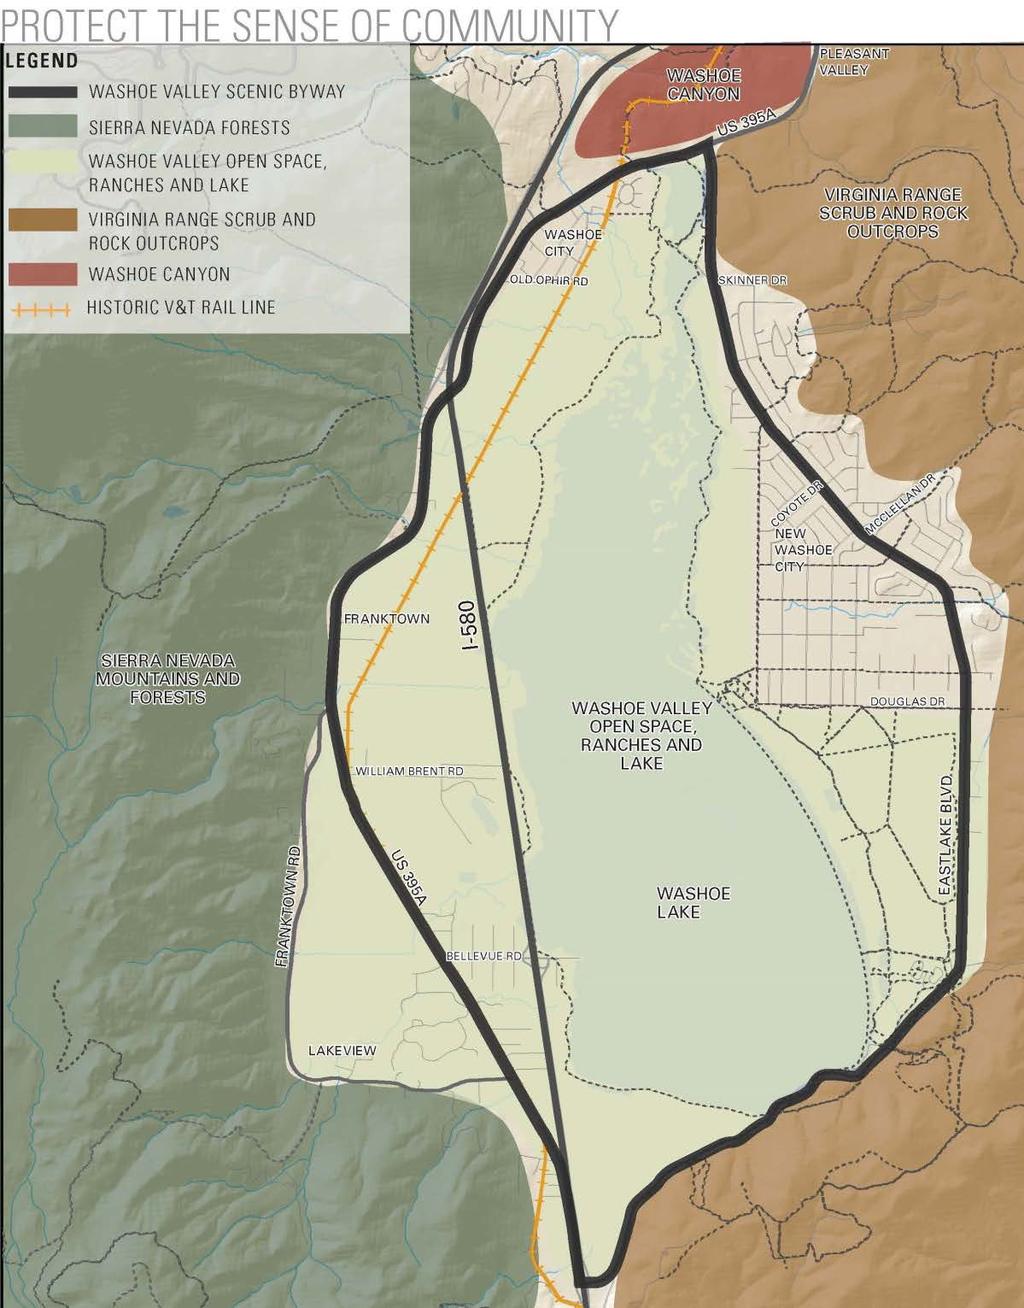 WASHOE VALLEY BYWAY RECOMMENDATIONS PROTECT THE SENSE OF COMMUNITY Preserve Views + Scenic Vistas Manage development Manage new cell towers + wind turbines to not detract visual quality Preserve Open